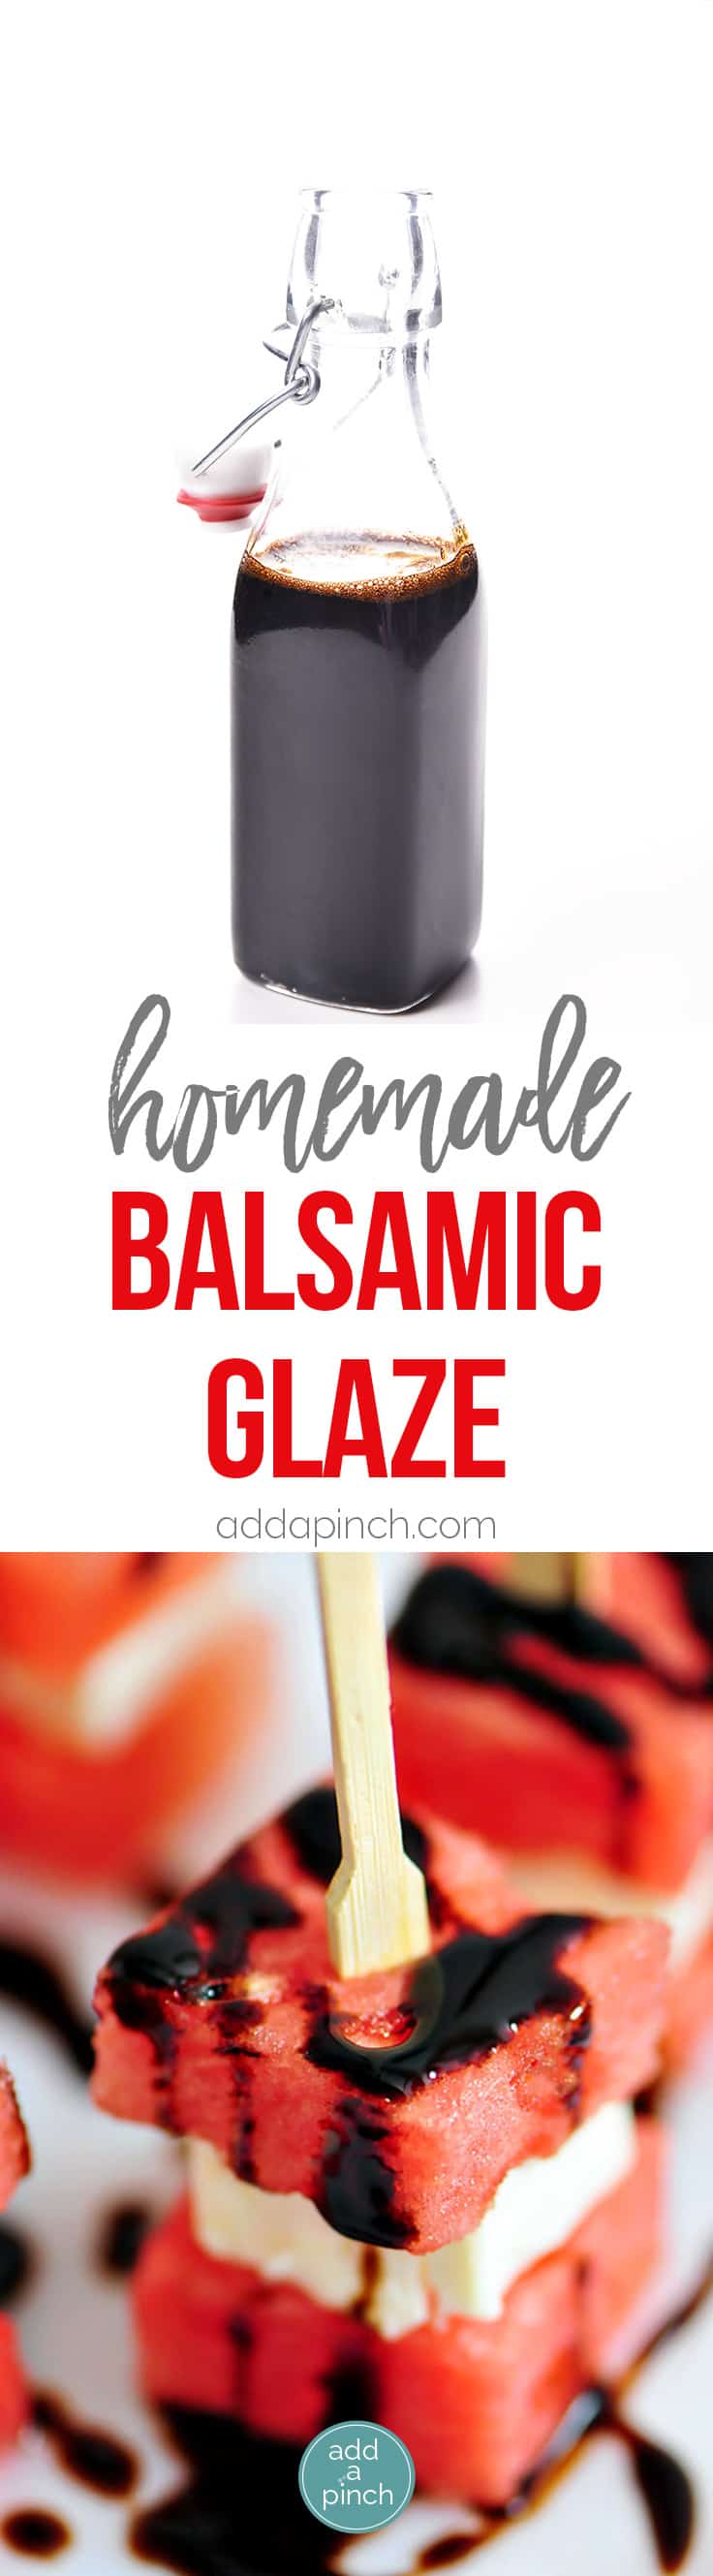 Homemade Balsamic Glaze Recipe - Balsamic glaze is so simple to make at home with just two ingredients! Delicious on so many dishes! // addapinch.com